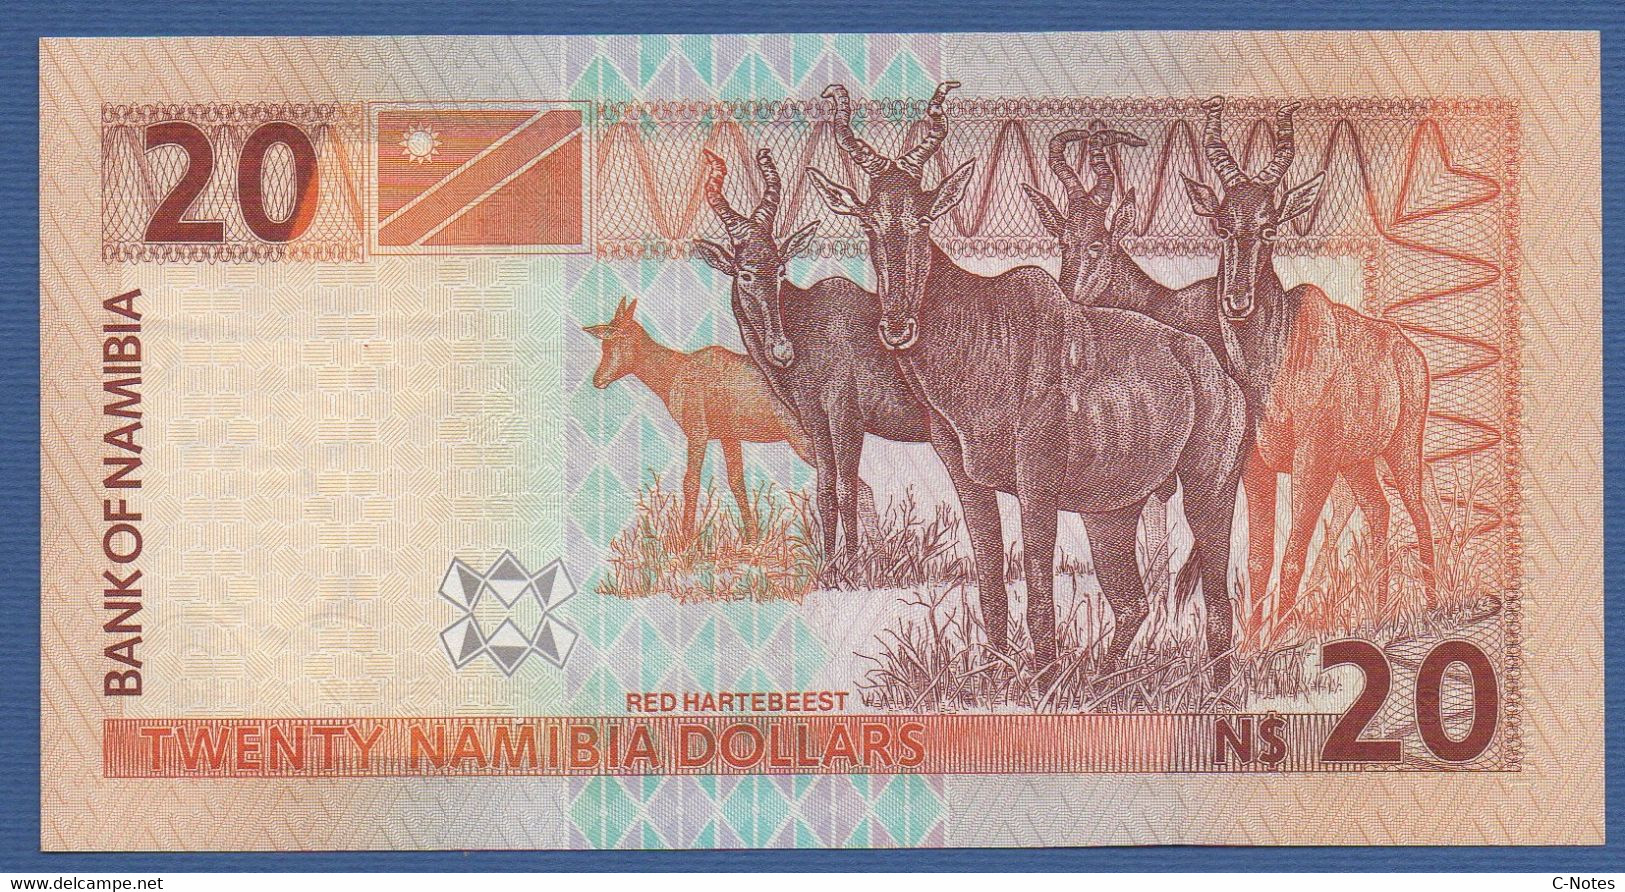 NAMIBIA - P. 6a – 20 Namibia Dollars ND (2003) UNC Serie J29744057 8 Digits Serial - Namibia